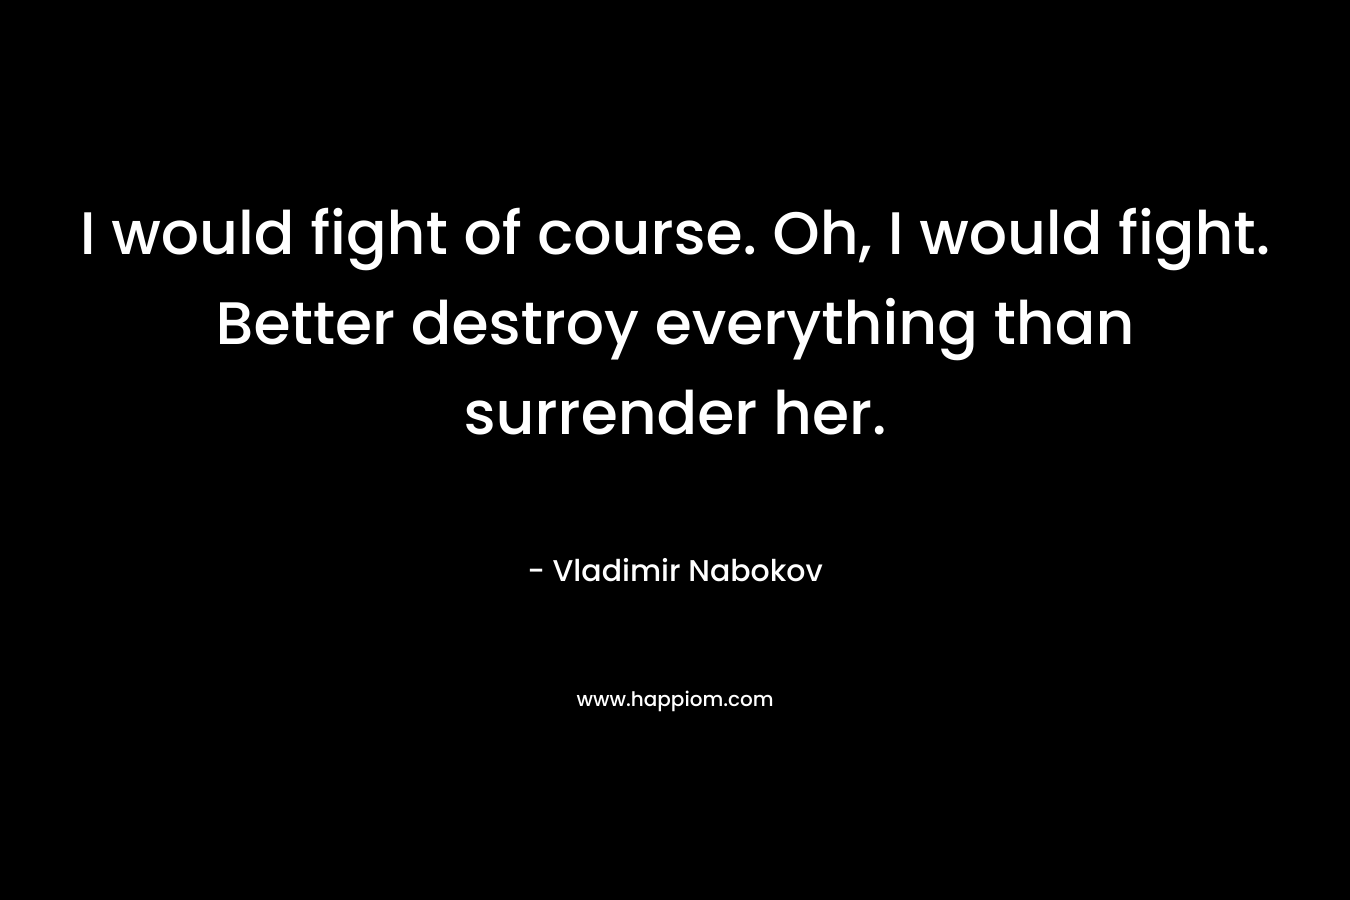 I would fight of course. Oh, I would fight. Better destroy everything than surrender her. – Vladimir Nabokov